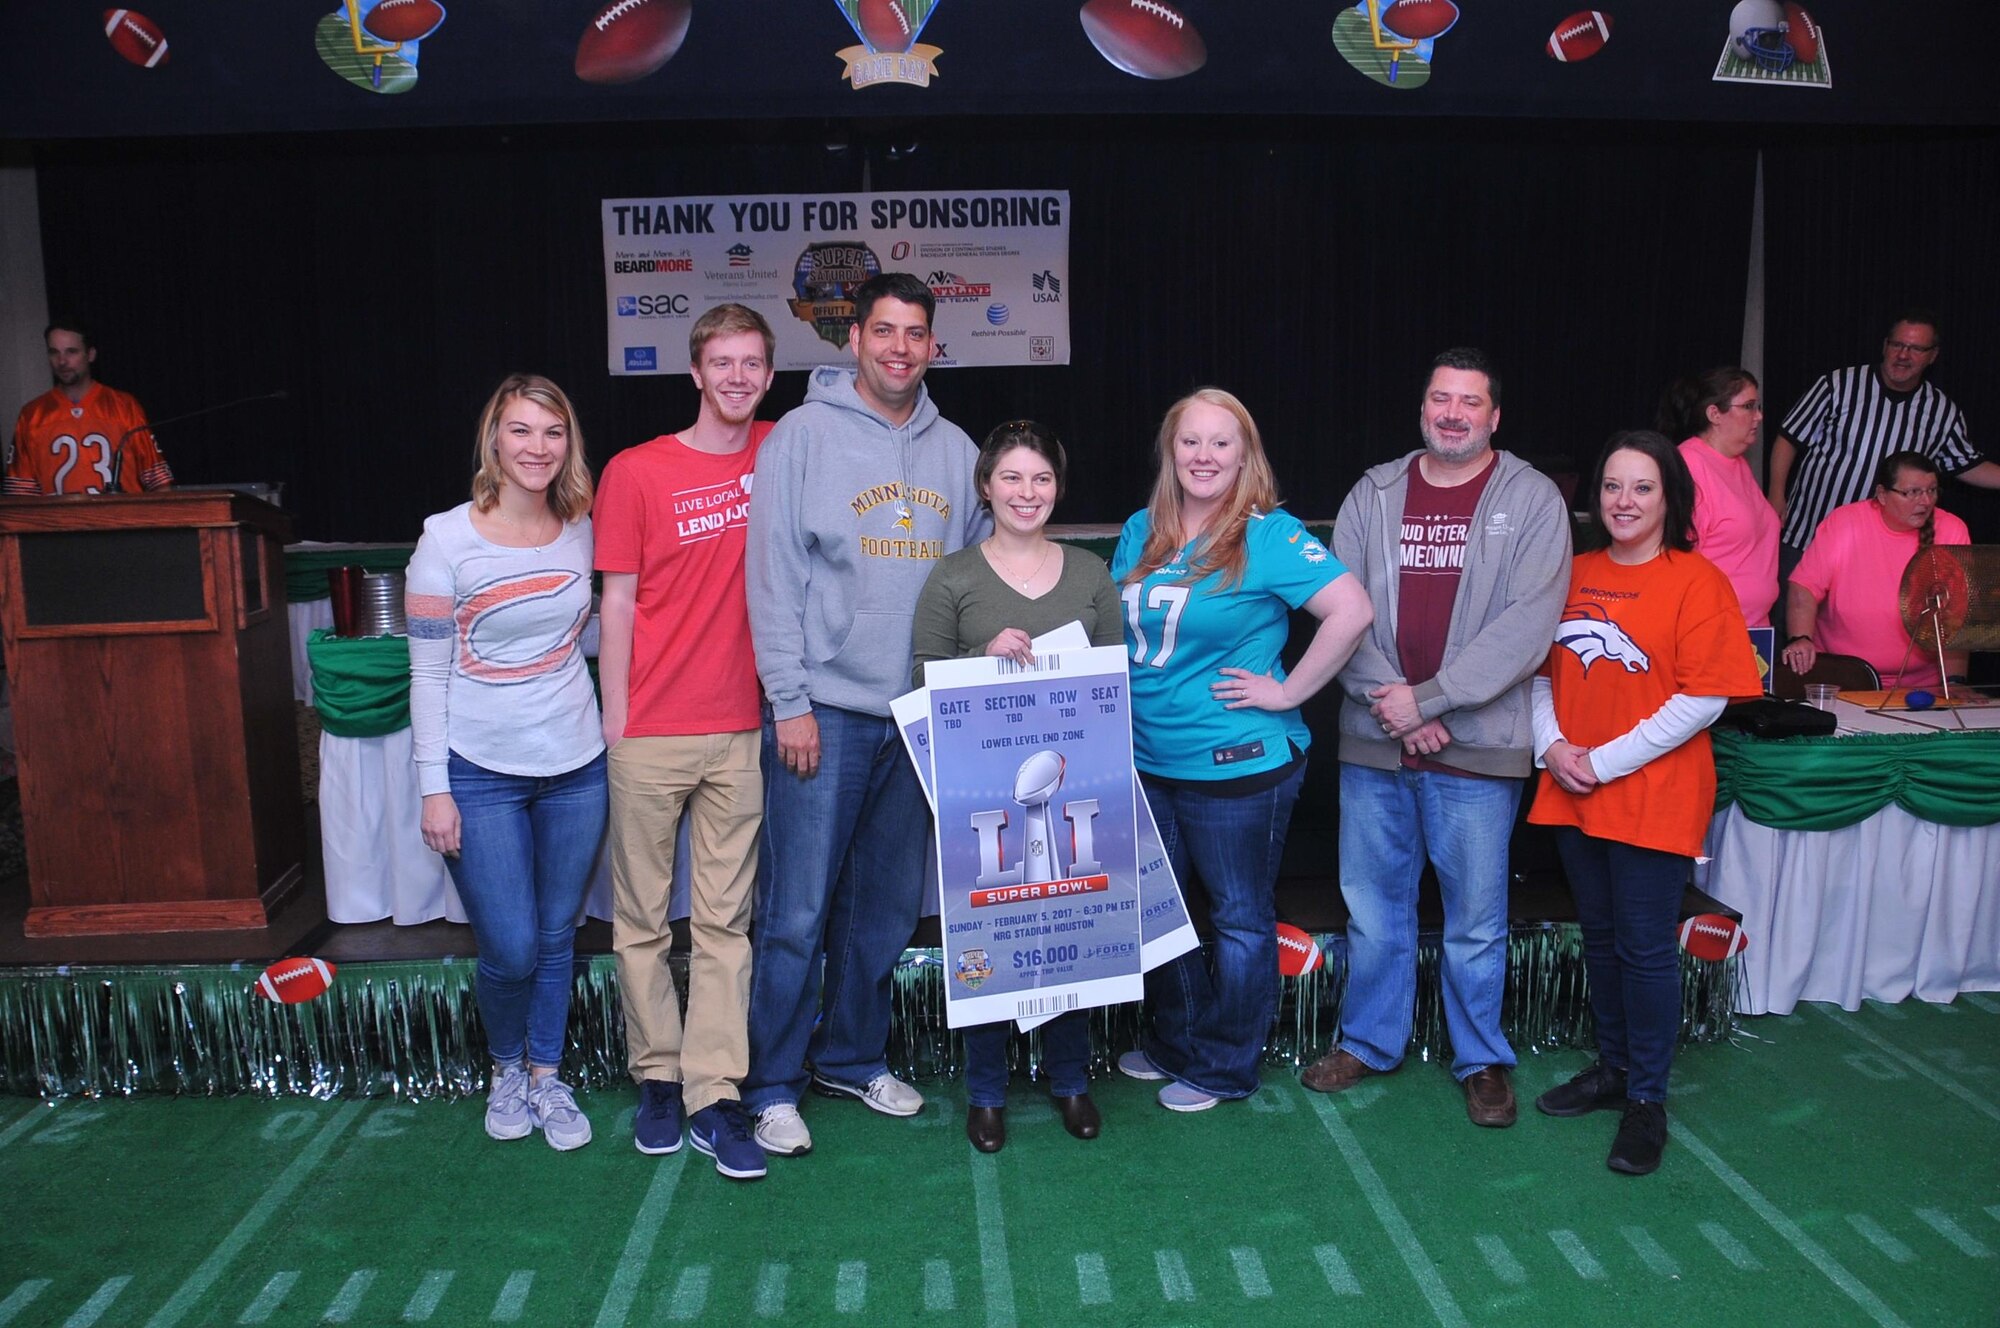 Nick Schuster, in the gray Minnesota Football sweatshirt of Veterans United Home Loans, the title sponsor for Super Saturday is seen here with his staff and the Super Saturday Bingo winner Maj. Kelly Borukhovich,20th Intelligence Squadron, to his right. The Offutt Air Force Base’s Super Saturday event was at the Patriot Club on Jan. 21. The event included live and silent auctions of sports mermorbelia and Bingo to determine who wins the grand prize of an all expenses paid trip for two to Super Bowl LI. (U.S. Air Force photo by D.P. Heard)